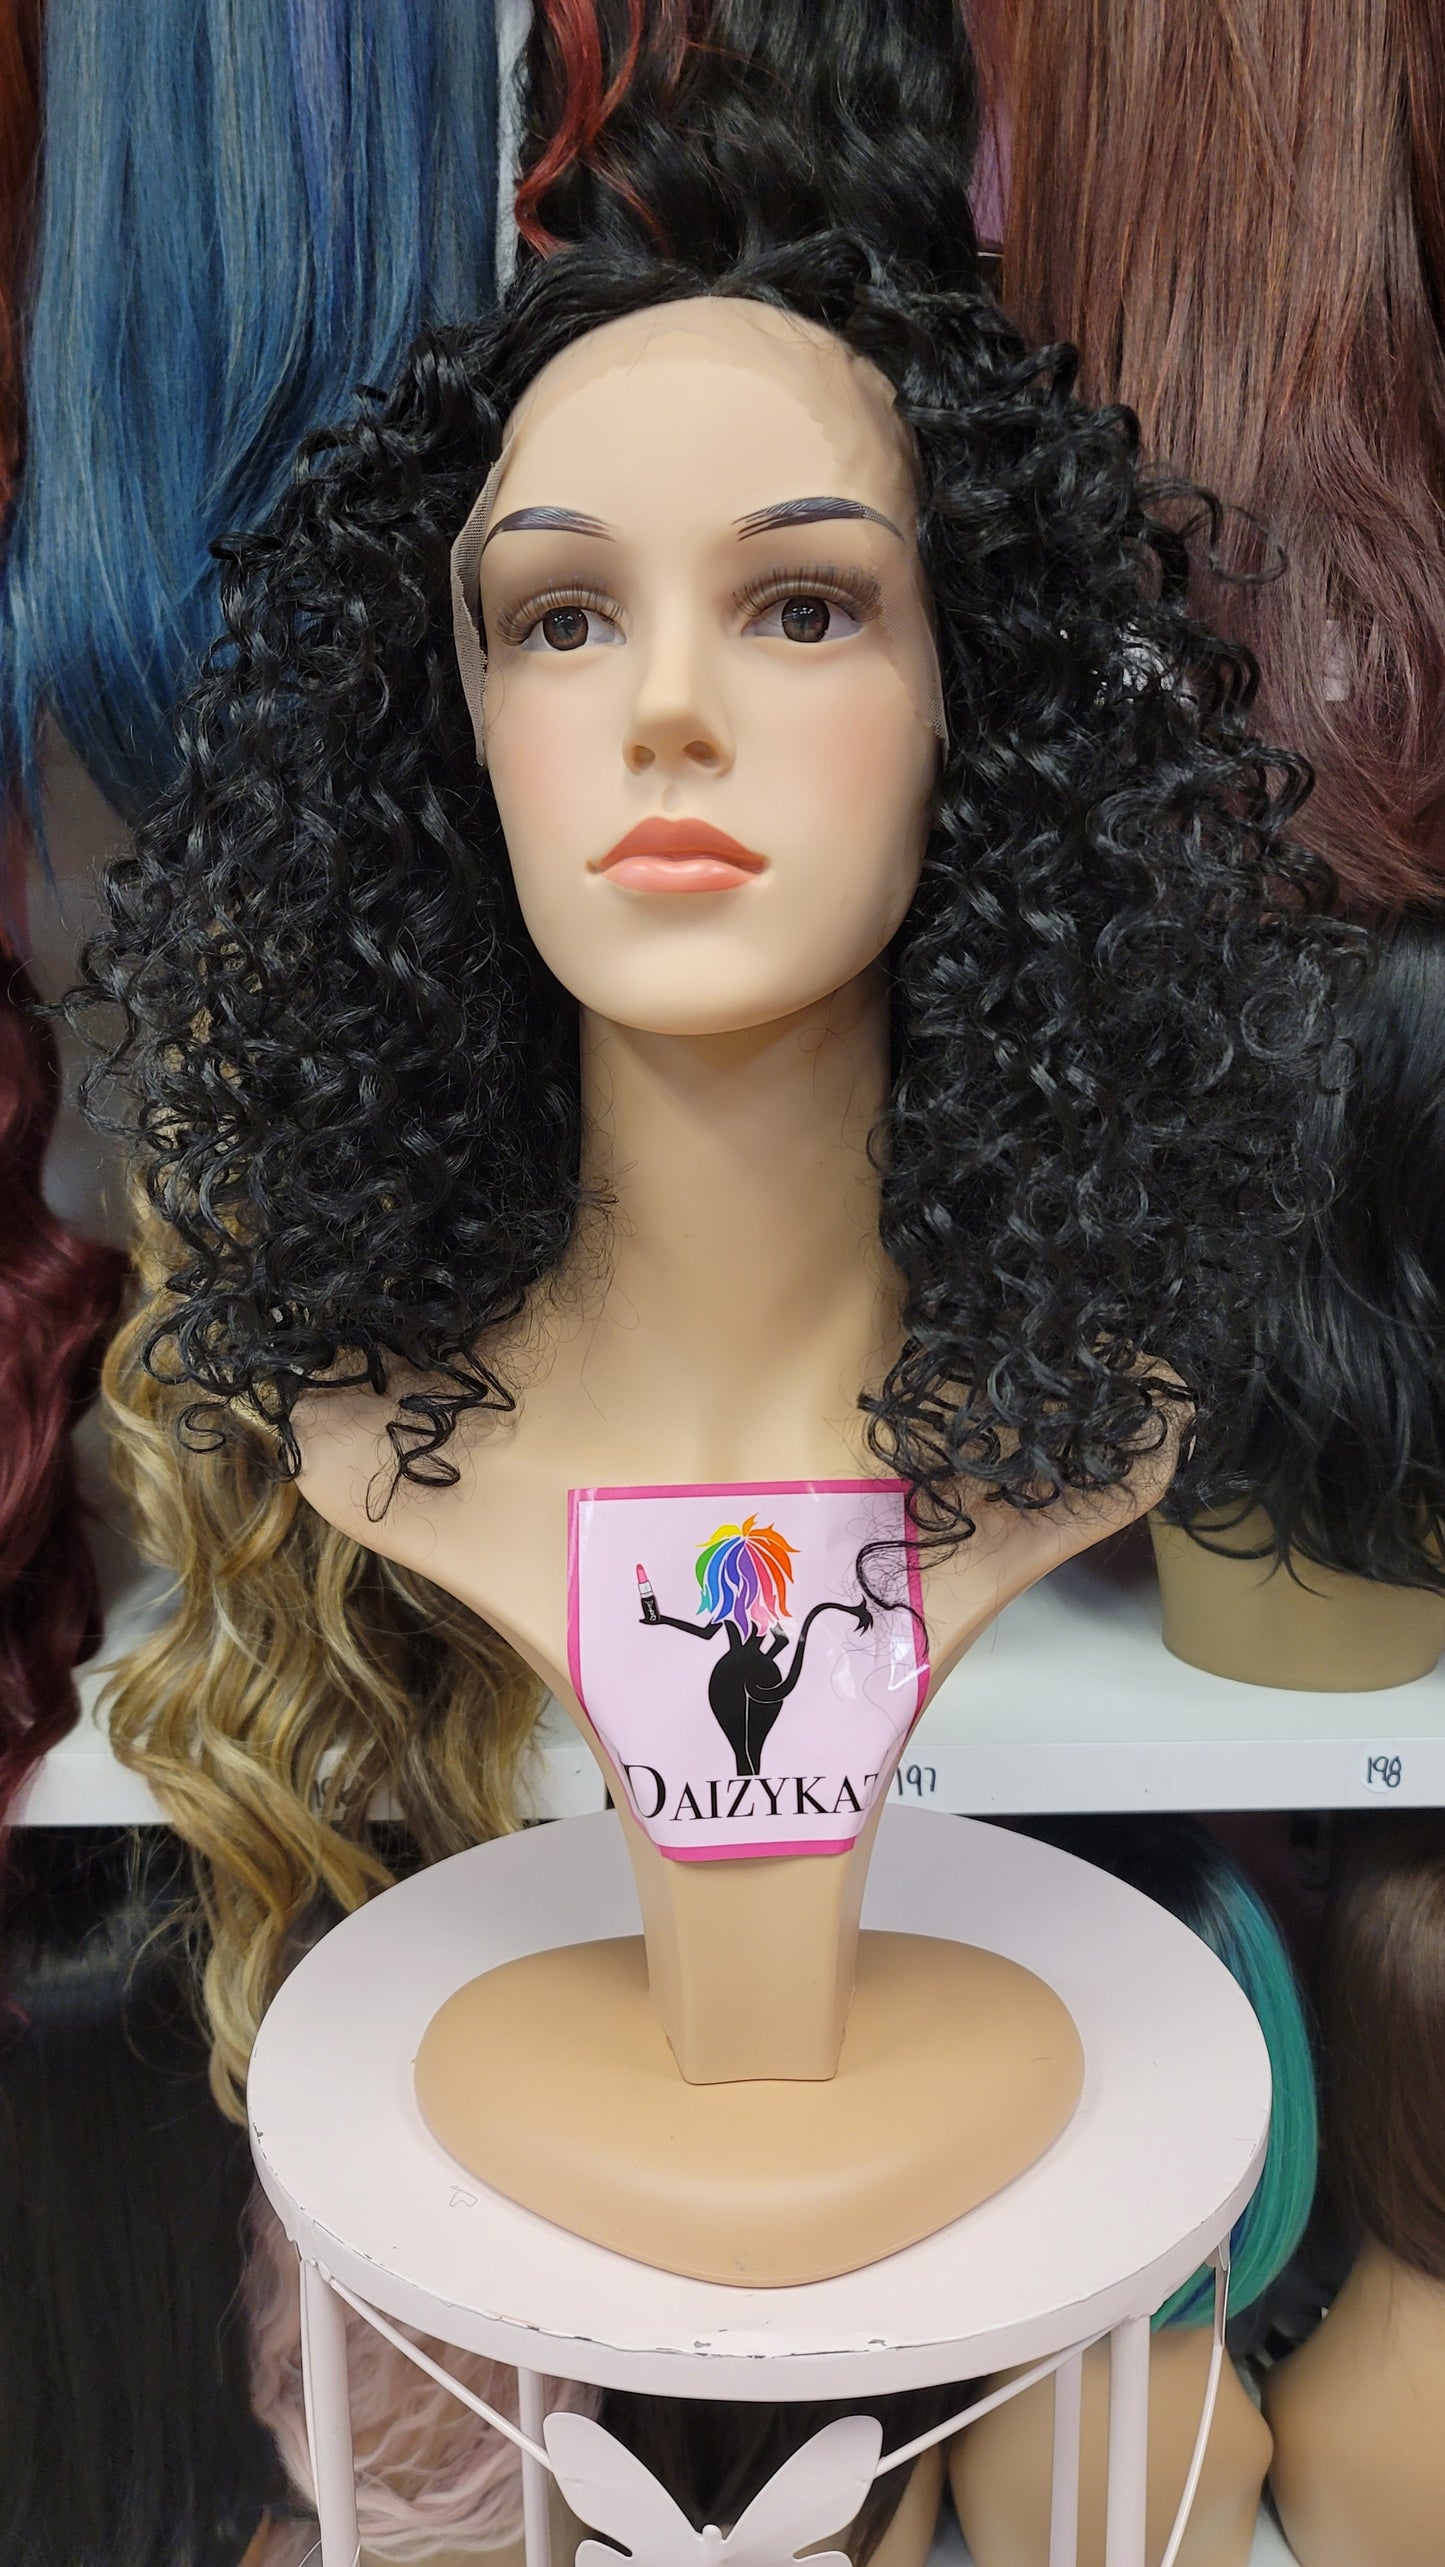 21 LUPE - Middle Part Lace Front Wig - 1B - DaizyKat Cosmetics 21 LUPE - Middle Part Lace Front Wig - 1B DaizyKat Cosmetics Wigs